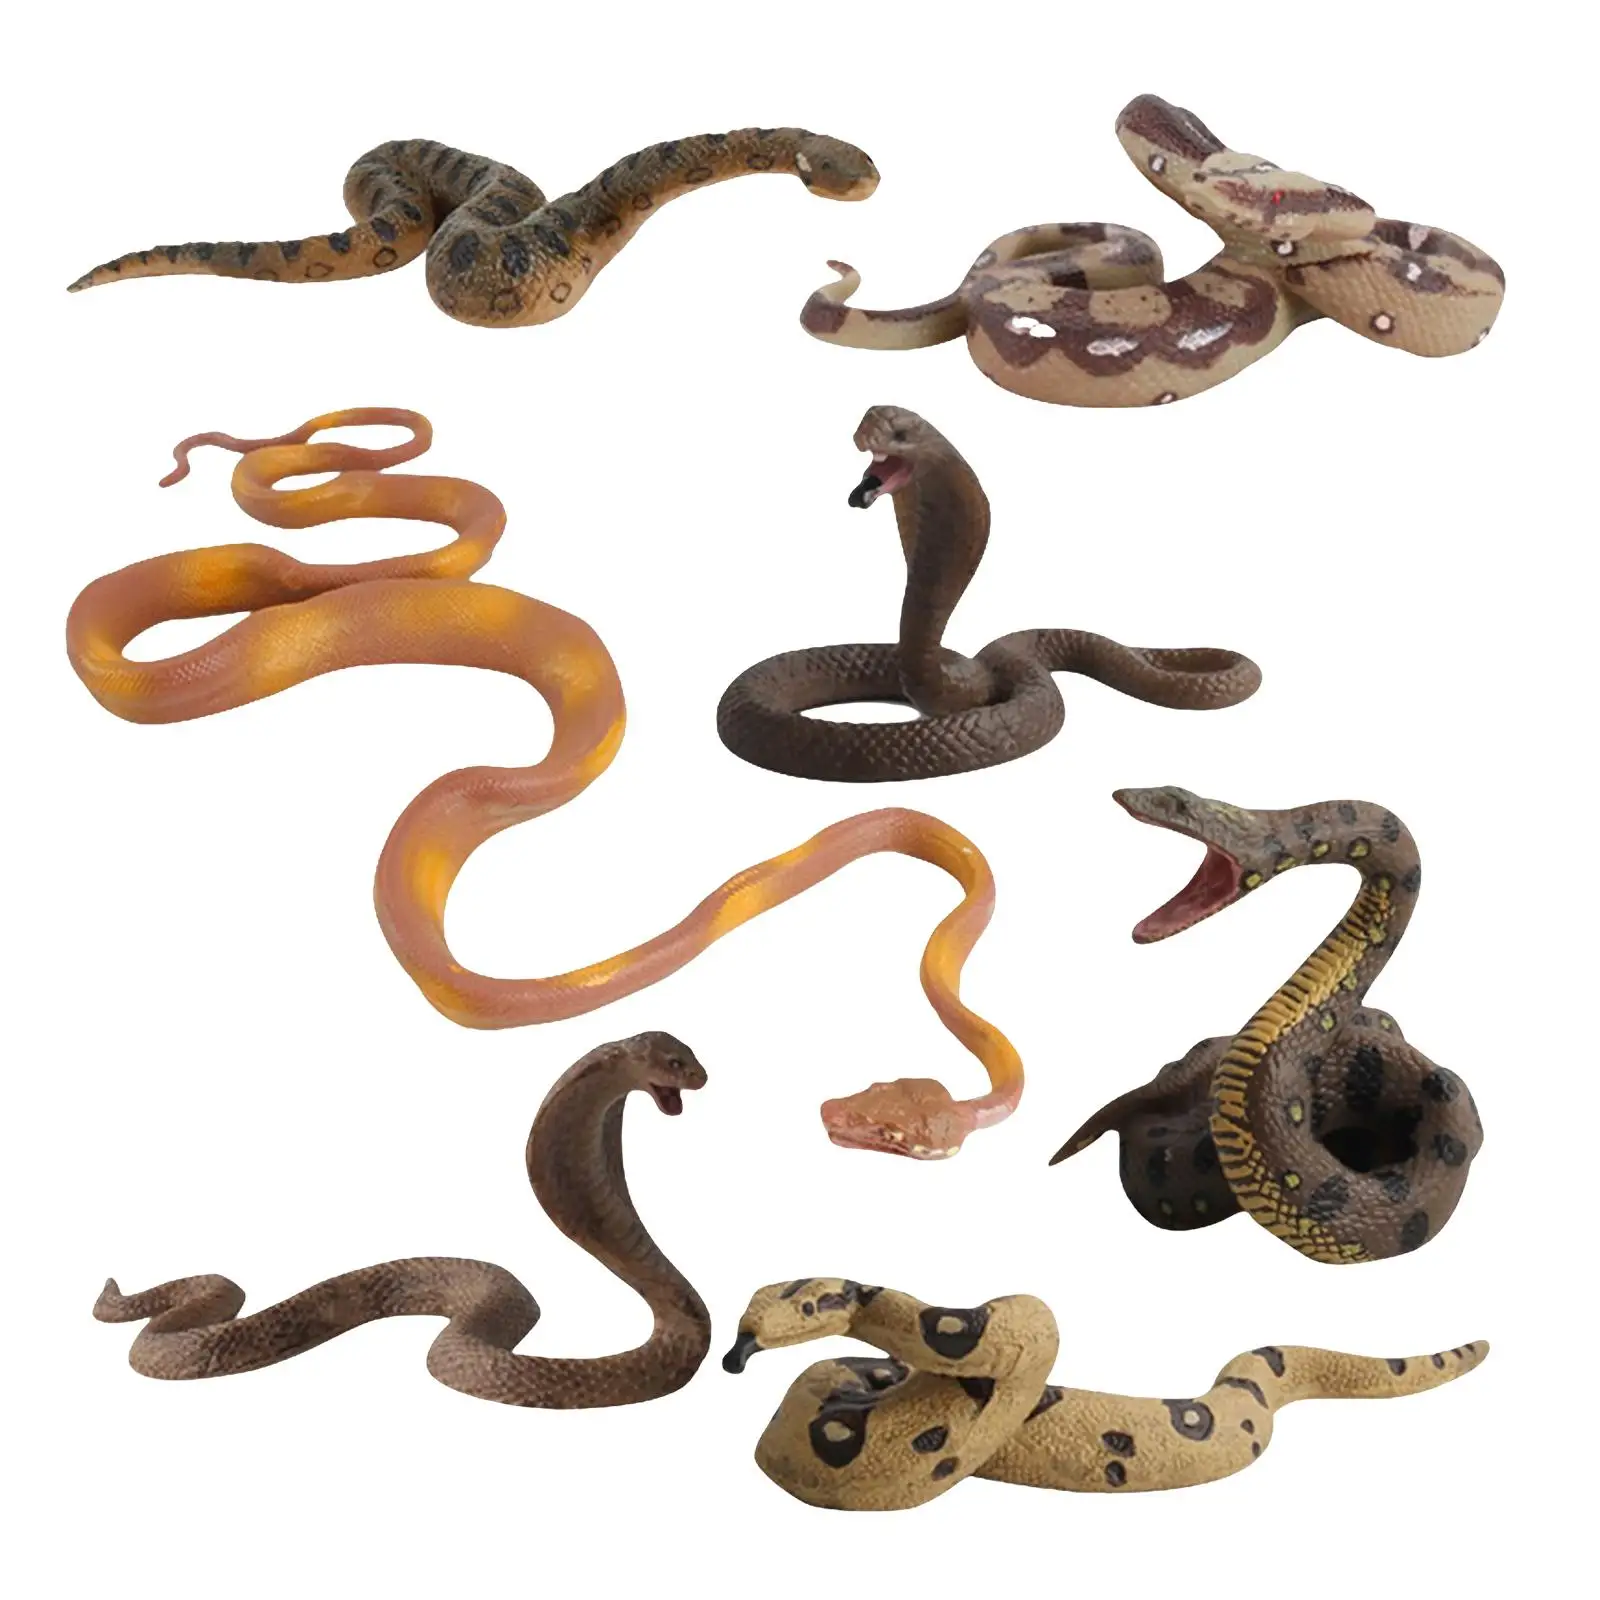 High Simulation Snake Model Toy for Tabletop Decors Party Favor Jokes Prop